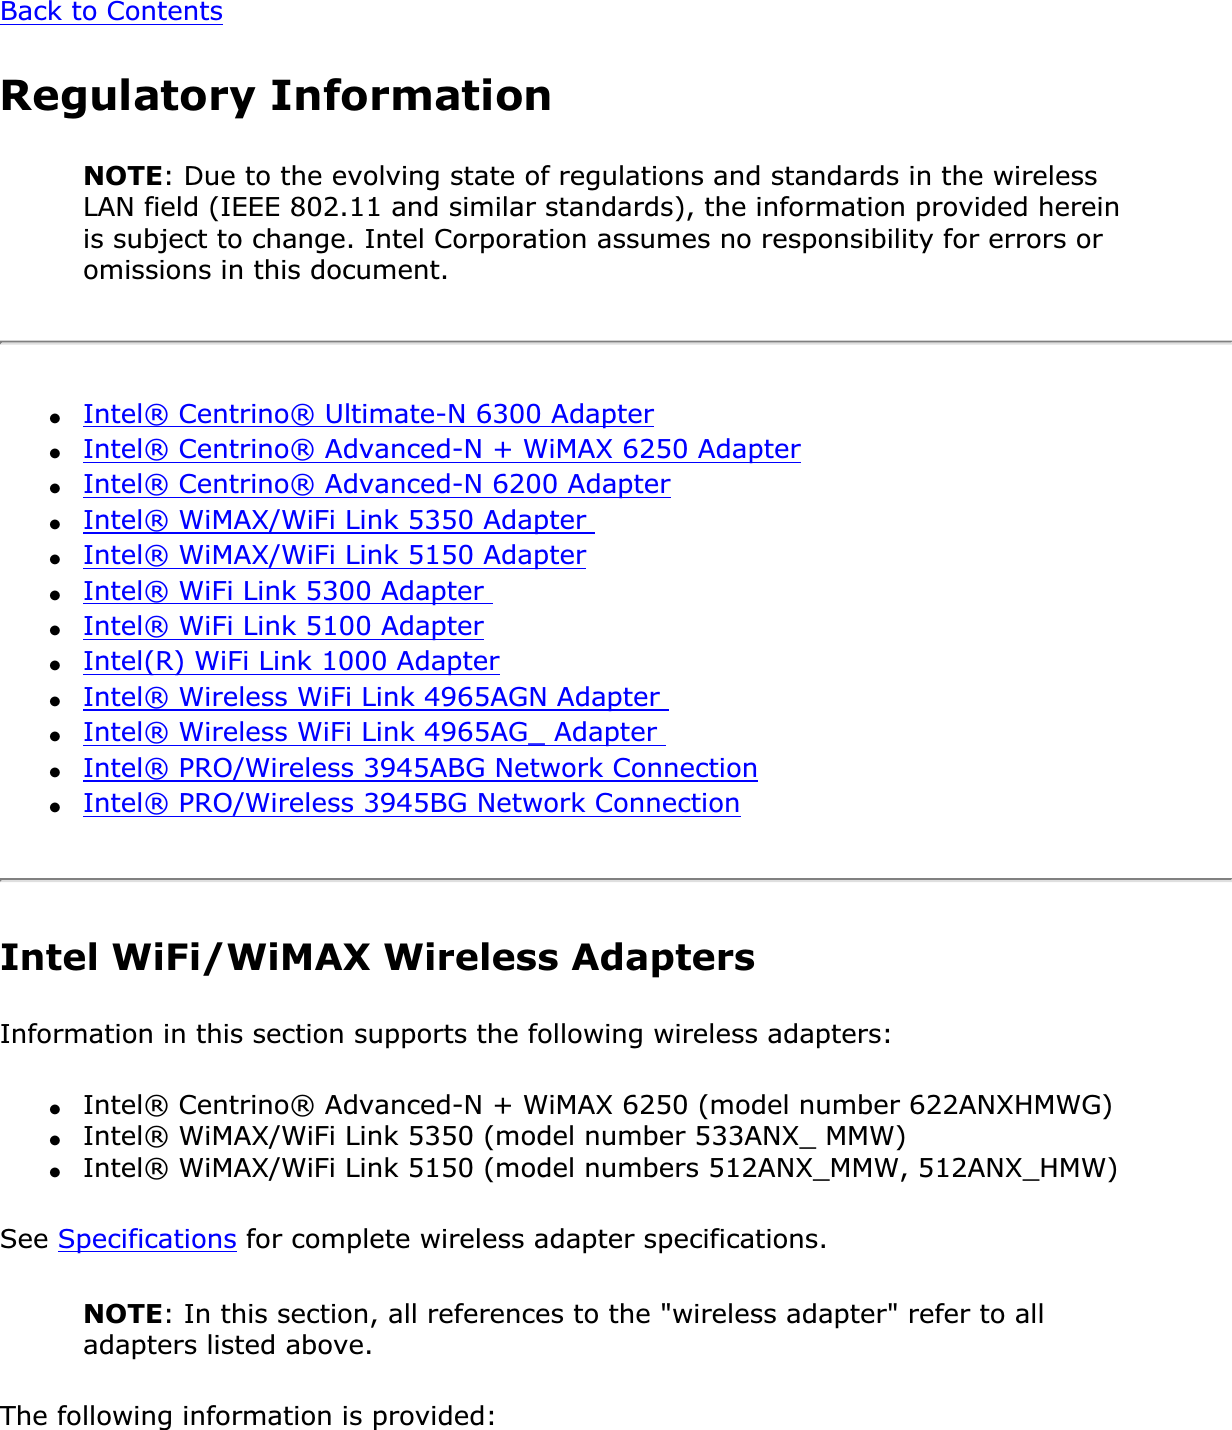 Back to ContentsRegulatory InformationNOTE: Due to the evolving state of regulations and standards in the wireless LAN field (IEEE 802.11 and similar standards), the information provided herein is subject to change. Intel Corporation assumes no responsibility for errors or omissions in this document.●Intel® Centrino® Ultimate-N 6300 Adapter●Intel® Centrino® Advanced-N + WiMAX 6250 Adapter●Intel® Centrino® Advanced-N 6200 Adapter●Intel® WiMAX/WiFi Link 5350 Adapter ●Intel® WiMAX/WiFi Link 5150 Adapter●Intel® WiFi Link 5300 Adapter ●Intel® WiFi Link 5100 Adapter●Intel(R) WiFi Link 1000 Adapter●Intel® Wireless WiFi Link 4965AGN Adapter ●Intel® Wireless WiFi Link 4965AG_ Adapter ●Intel® PRO/Wireless 3945ABG Network Connection●Intel® PRO/Wireless 3945BG Network ConnectionIntel WiFi/WiMAX Wireless AdaptersInformation in this section supports the following wireless adapters:●Intel® Centrino® Advanced-N + WiMAX 6250 (model number 622ANXHMWG)●Intel® WiMAX/WiFi Link 5350 (model number 533ANX_ MMW)●Intel® WiMAX/WiFi Link 5150 (model numbers 512ANX_MMW, 512ANX_HMW)See Specifications for complete wireless adapter specifications.NOTE: In this section, all references to the &quot;wireless adapter&quot; refer to all adapters listed above.The following information is provided: